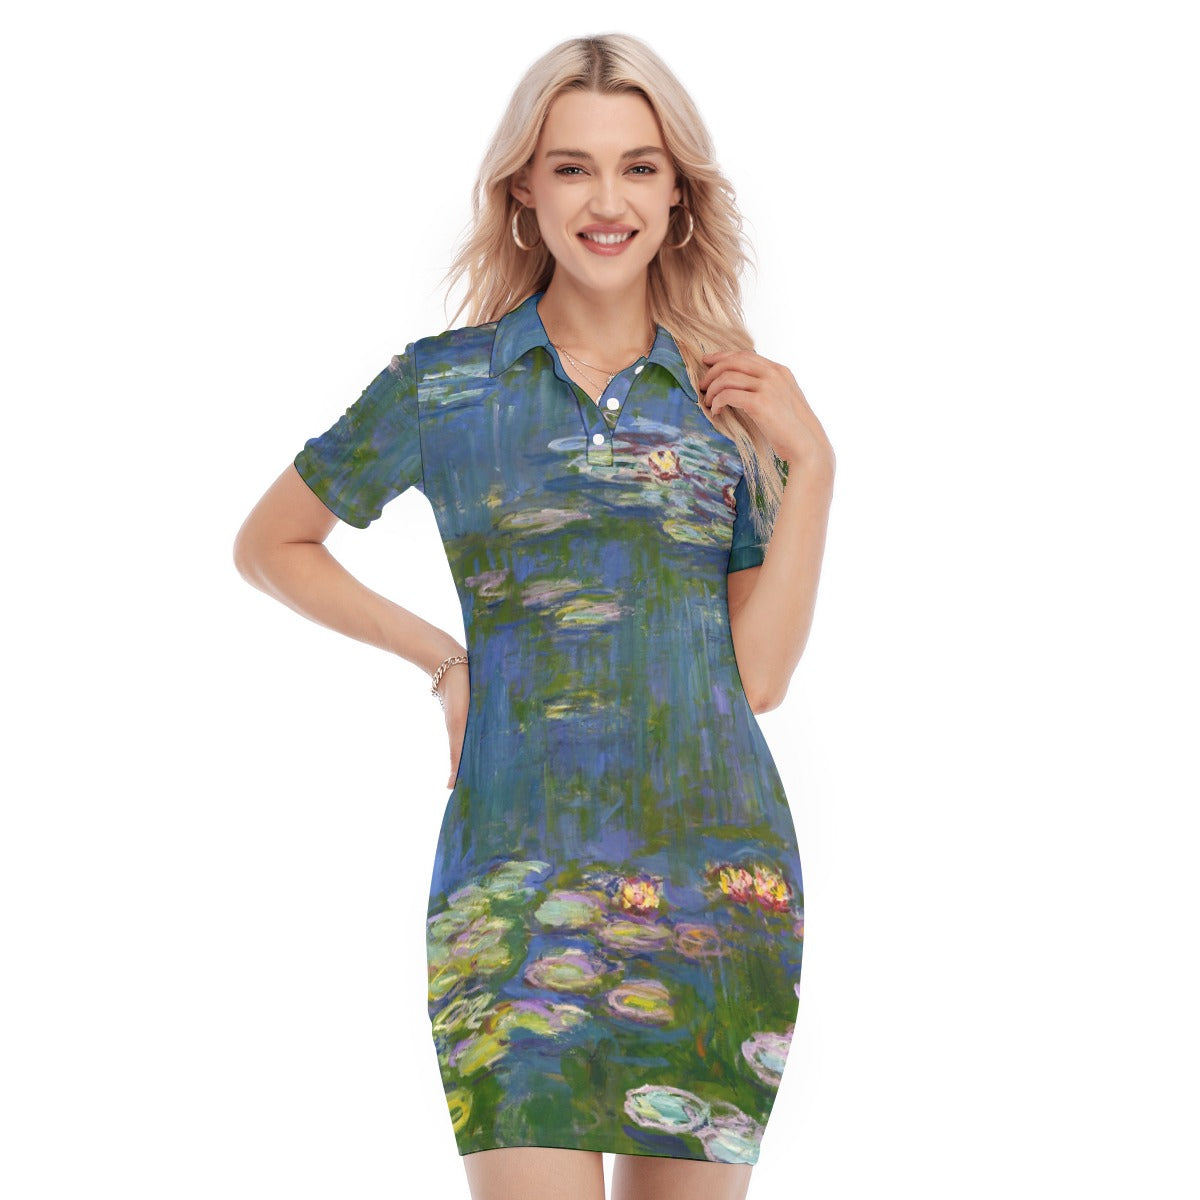 Enchanting Lily Pond Dress with Floral Print